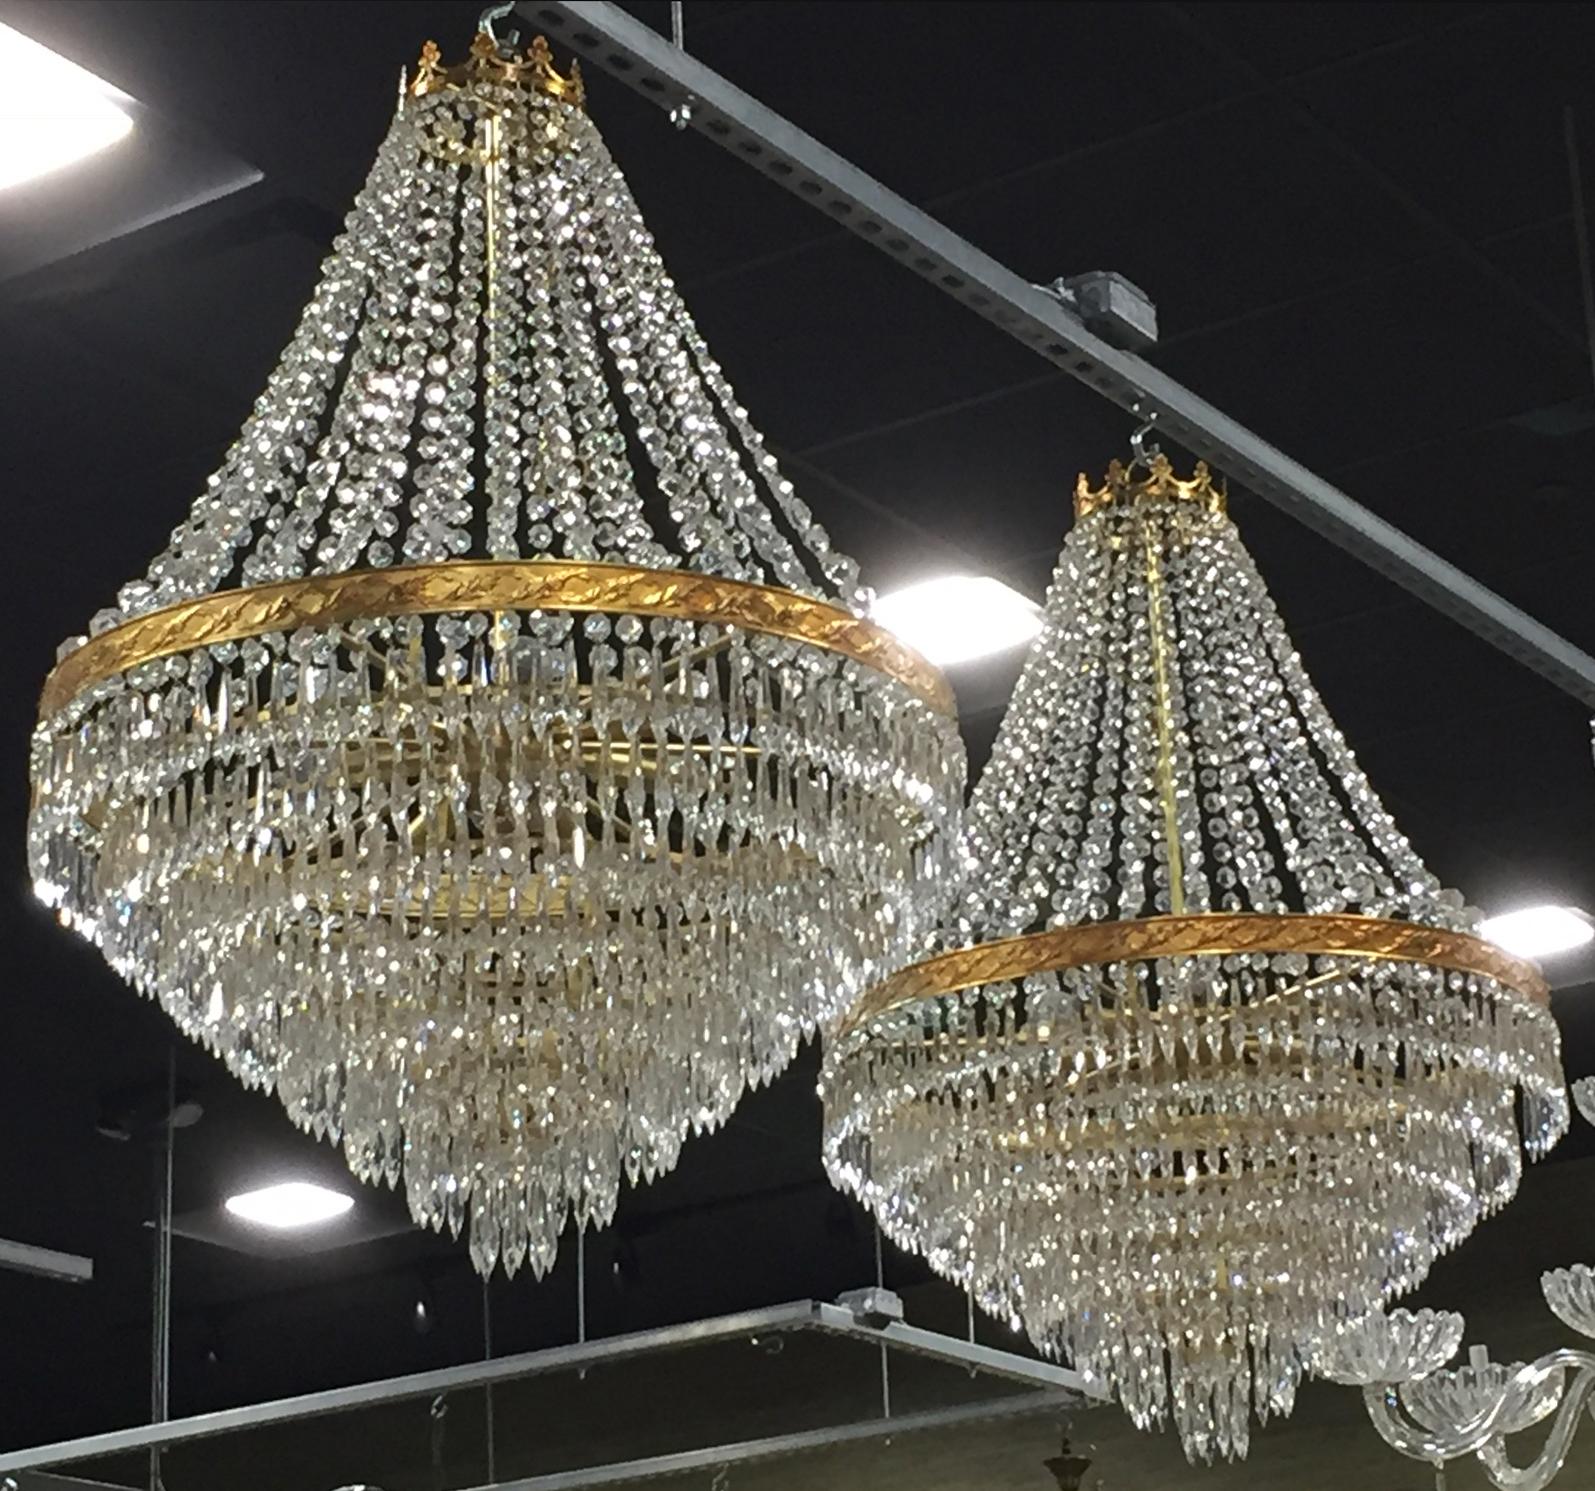 Pair of circa 1980s Italian wedding cake style chandeliers that each have eight tiers of crystal pendants and nine candelabra sockets. The decorative brass frames support draped crystal swags and chandeliers are topped with brass crown. New wiring